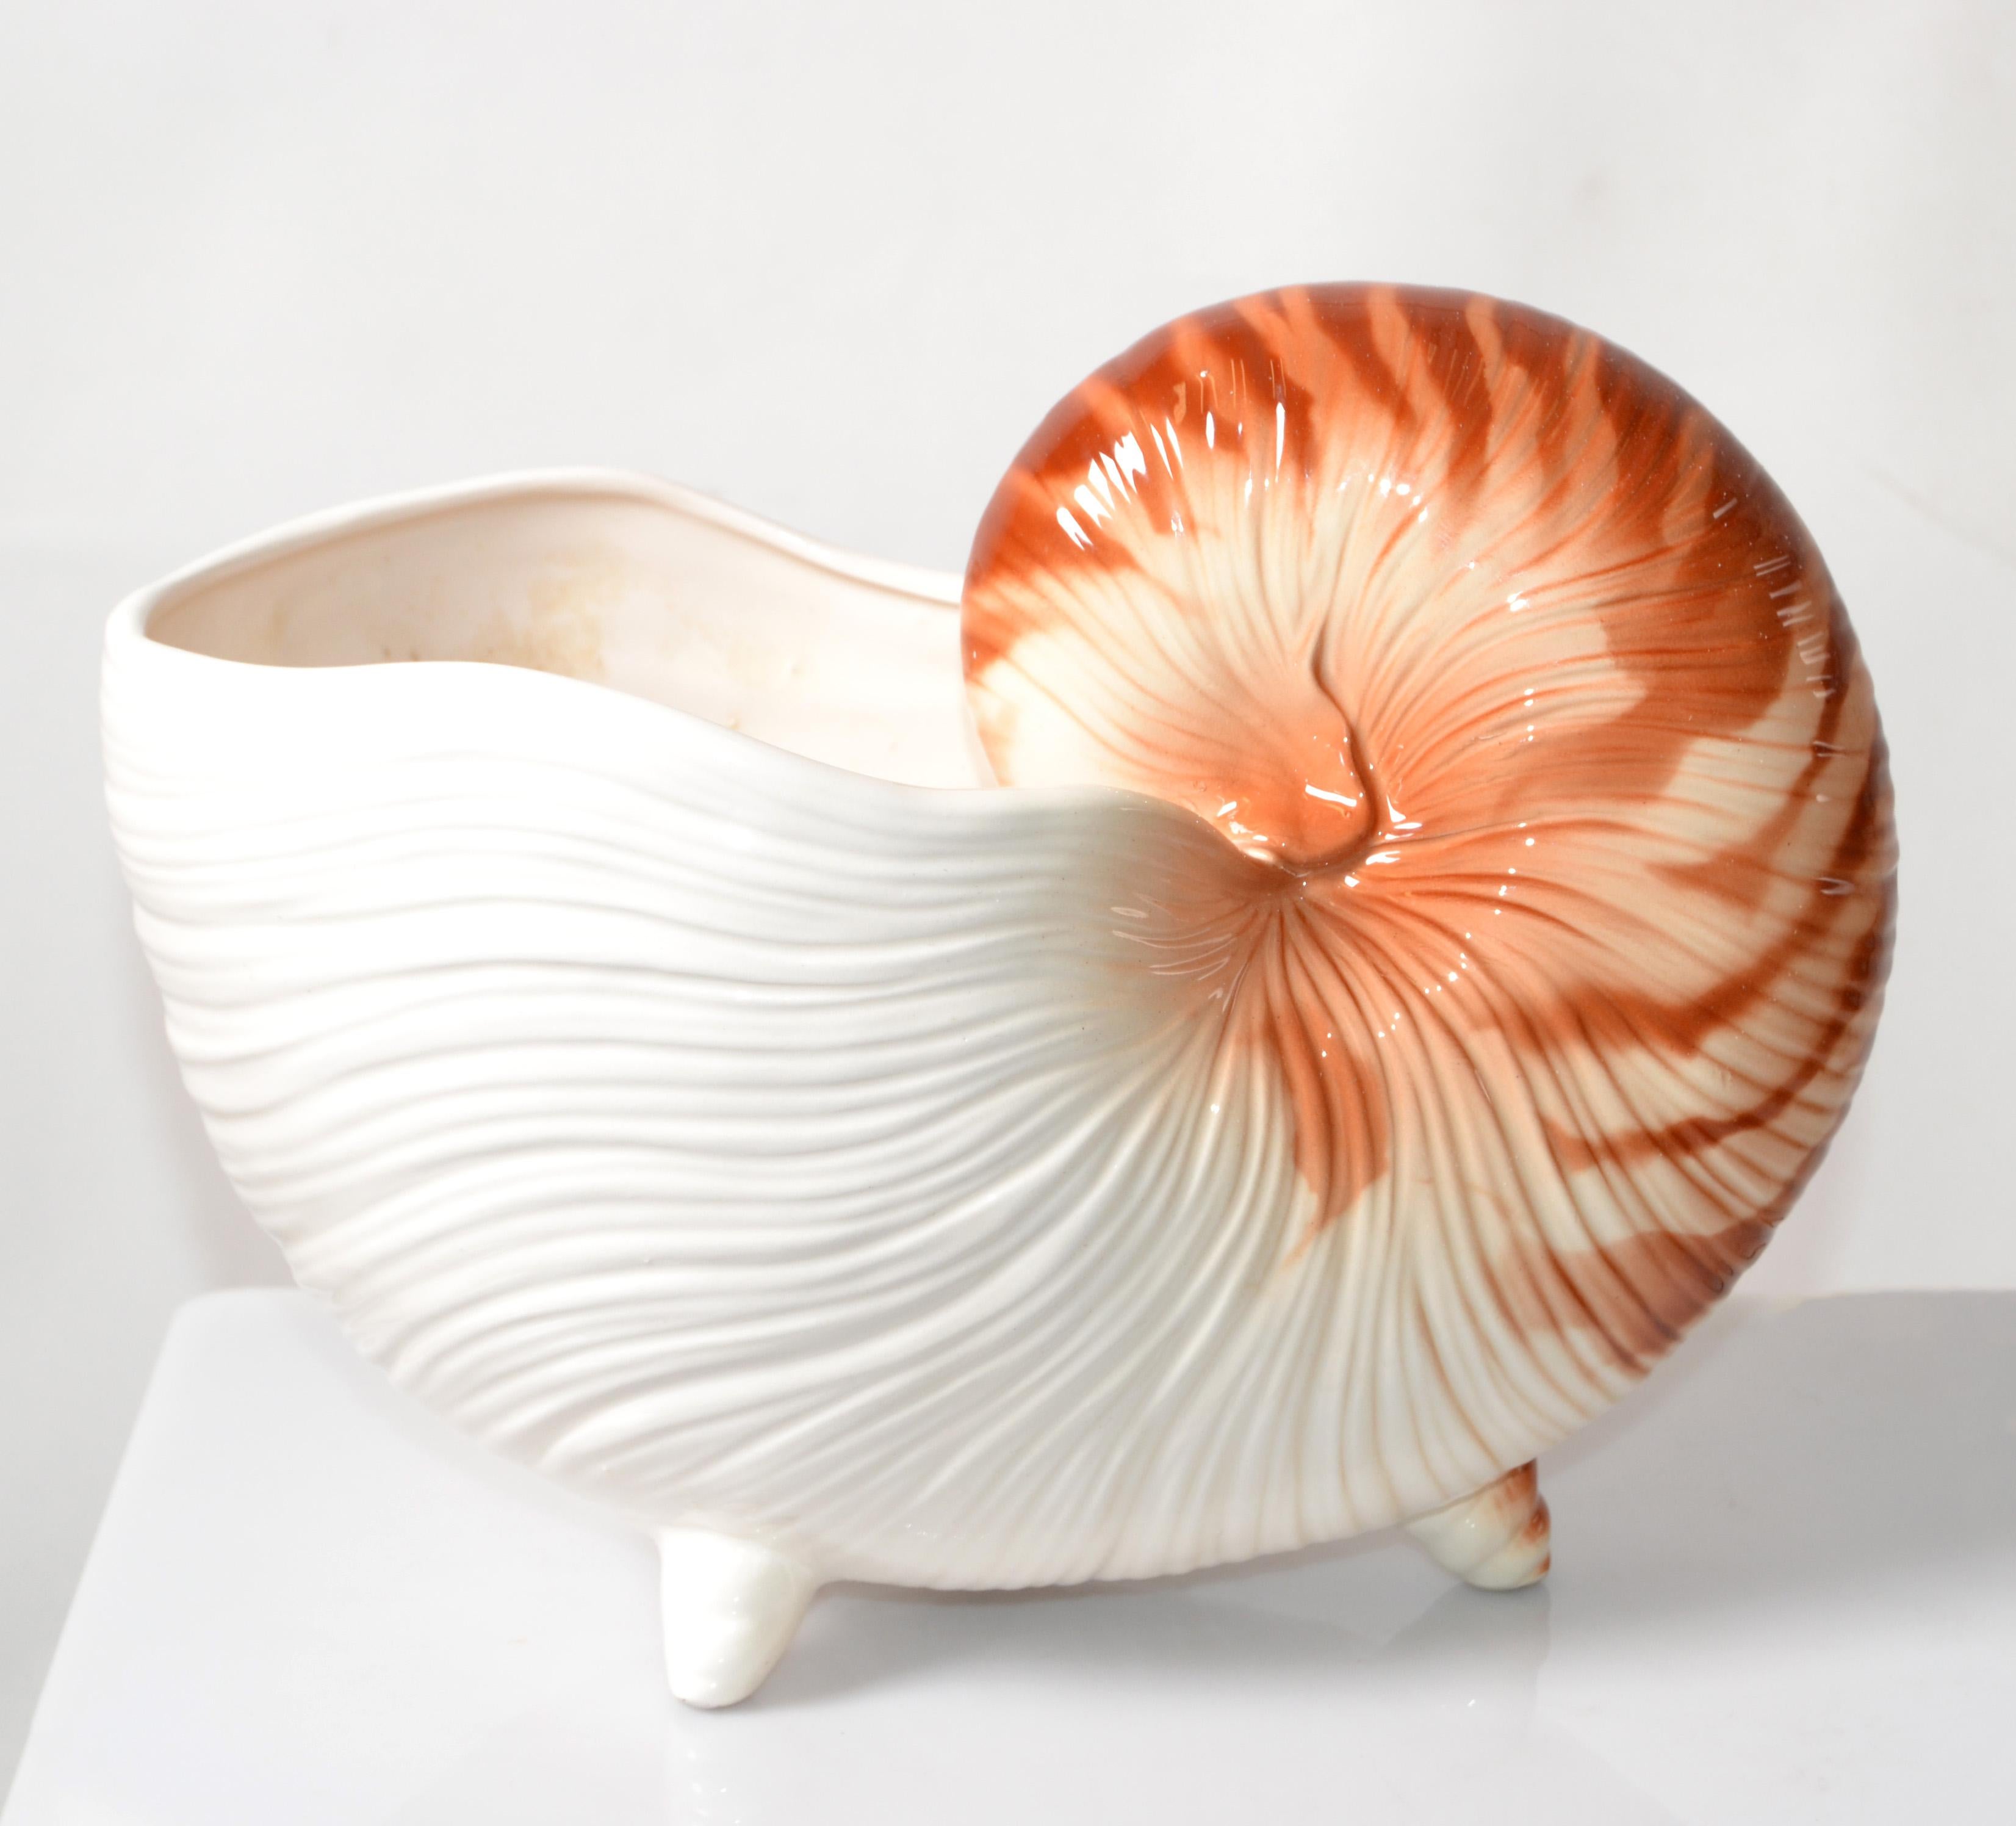 Hollywood Regency vintage hand painted Nautilus ceramic planter, footed Bowl, Centerpiece or Nautical Animal Sculpture.
Made in Japan in circa 1980.
The original FF Japan Label is attached at the Base.
In very good condition with no visible signs